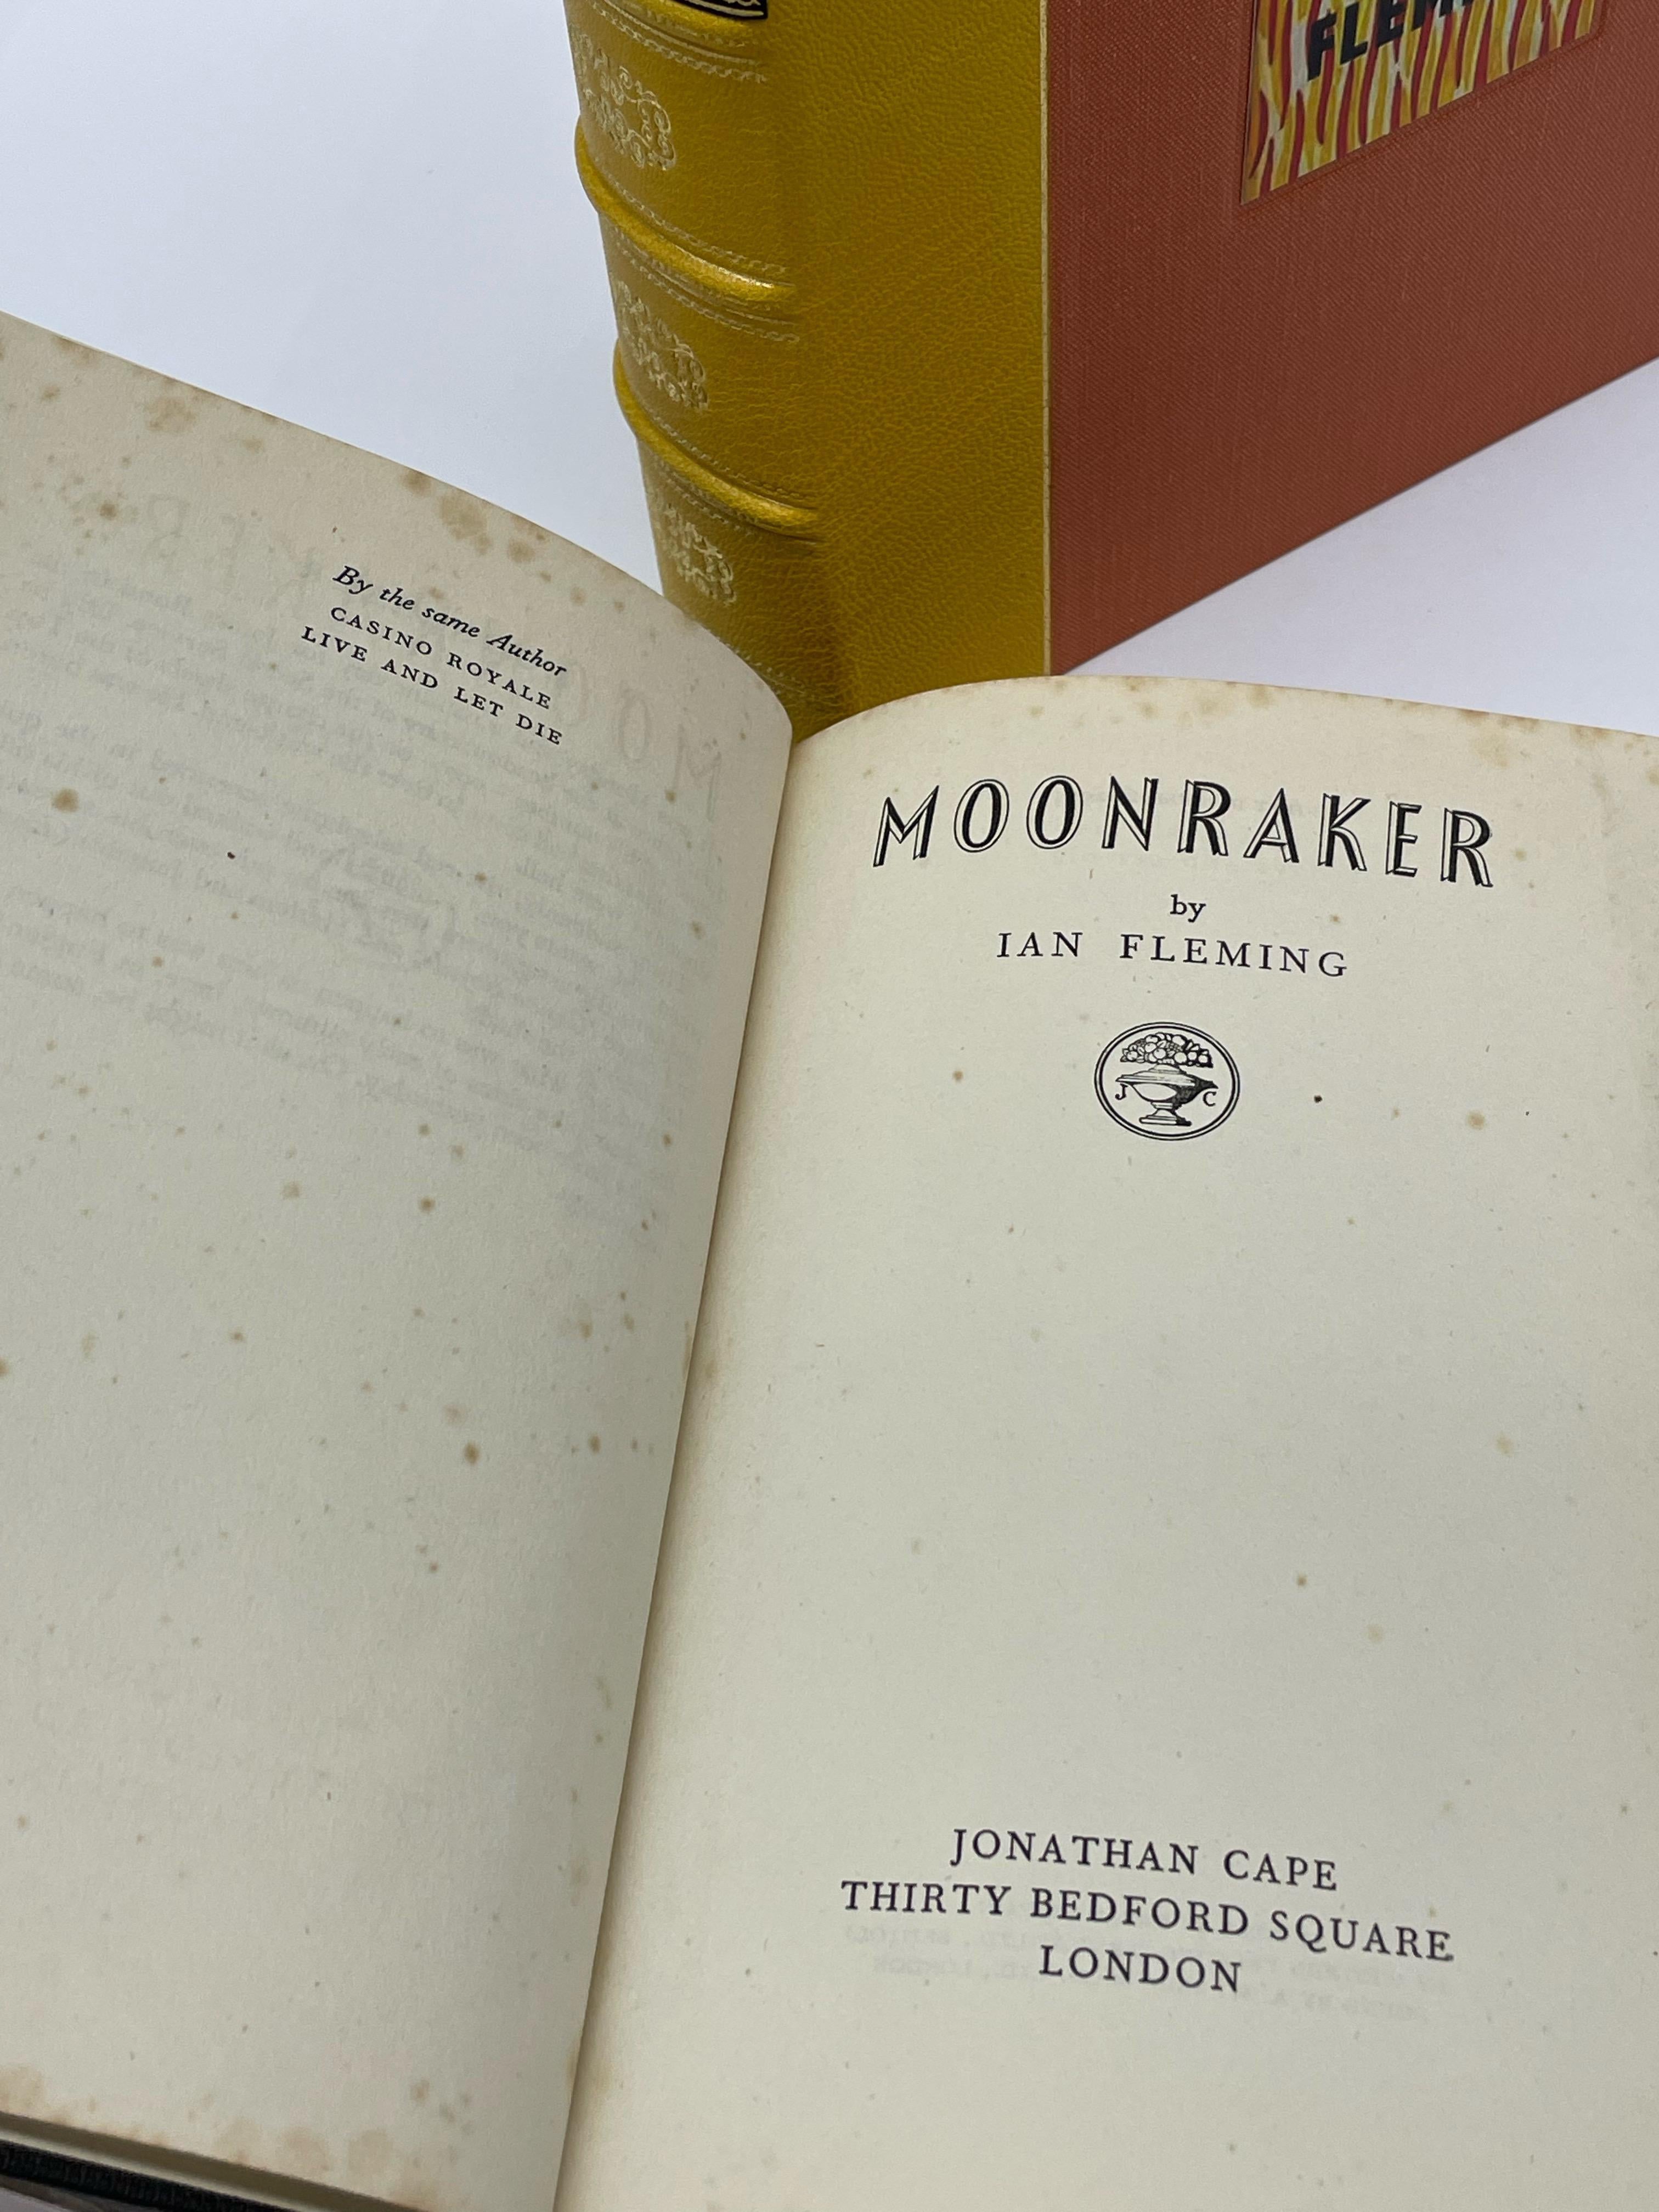 Fleming, Ian. Moonraker. London: Jonathan Cape, 1955. First Edition, Second State. Octavo, in original pictorial dust jacket and boards. Presented with a new archival ¼ leather and clamshell case. 

This is a first edition, second state printing